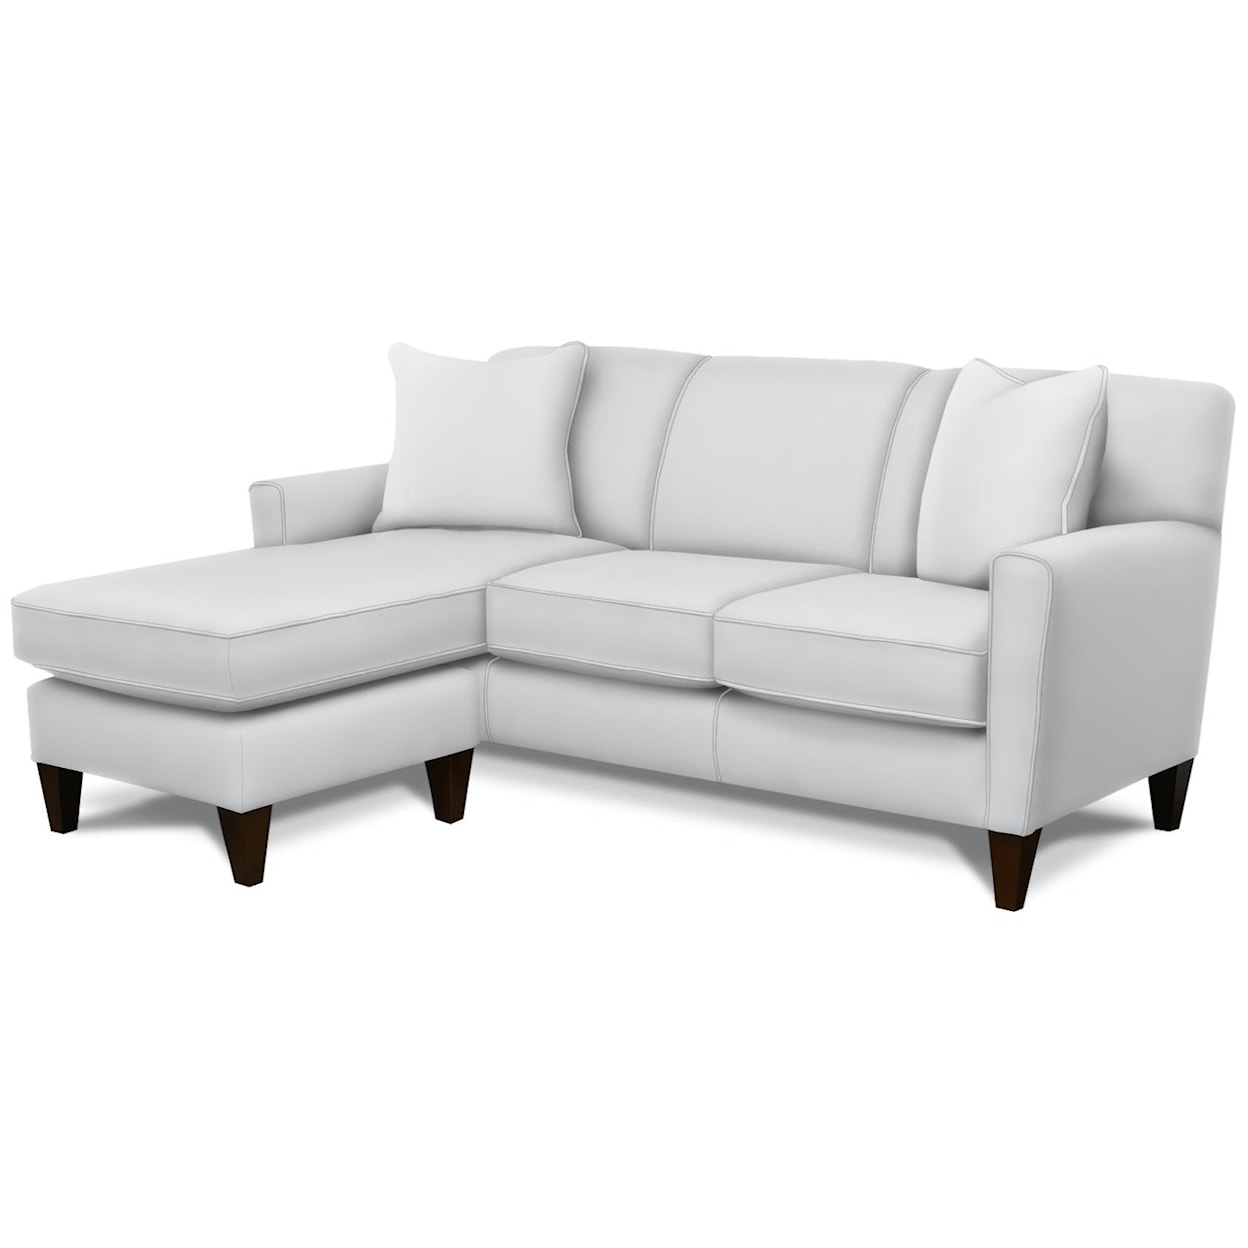 England Collegedale Floating Ottoman Chaise Sofa